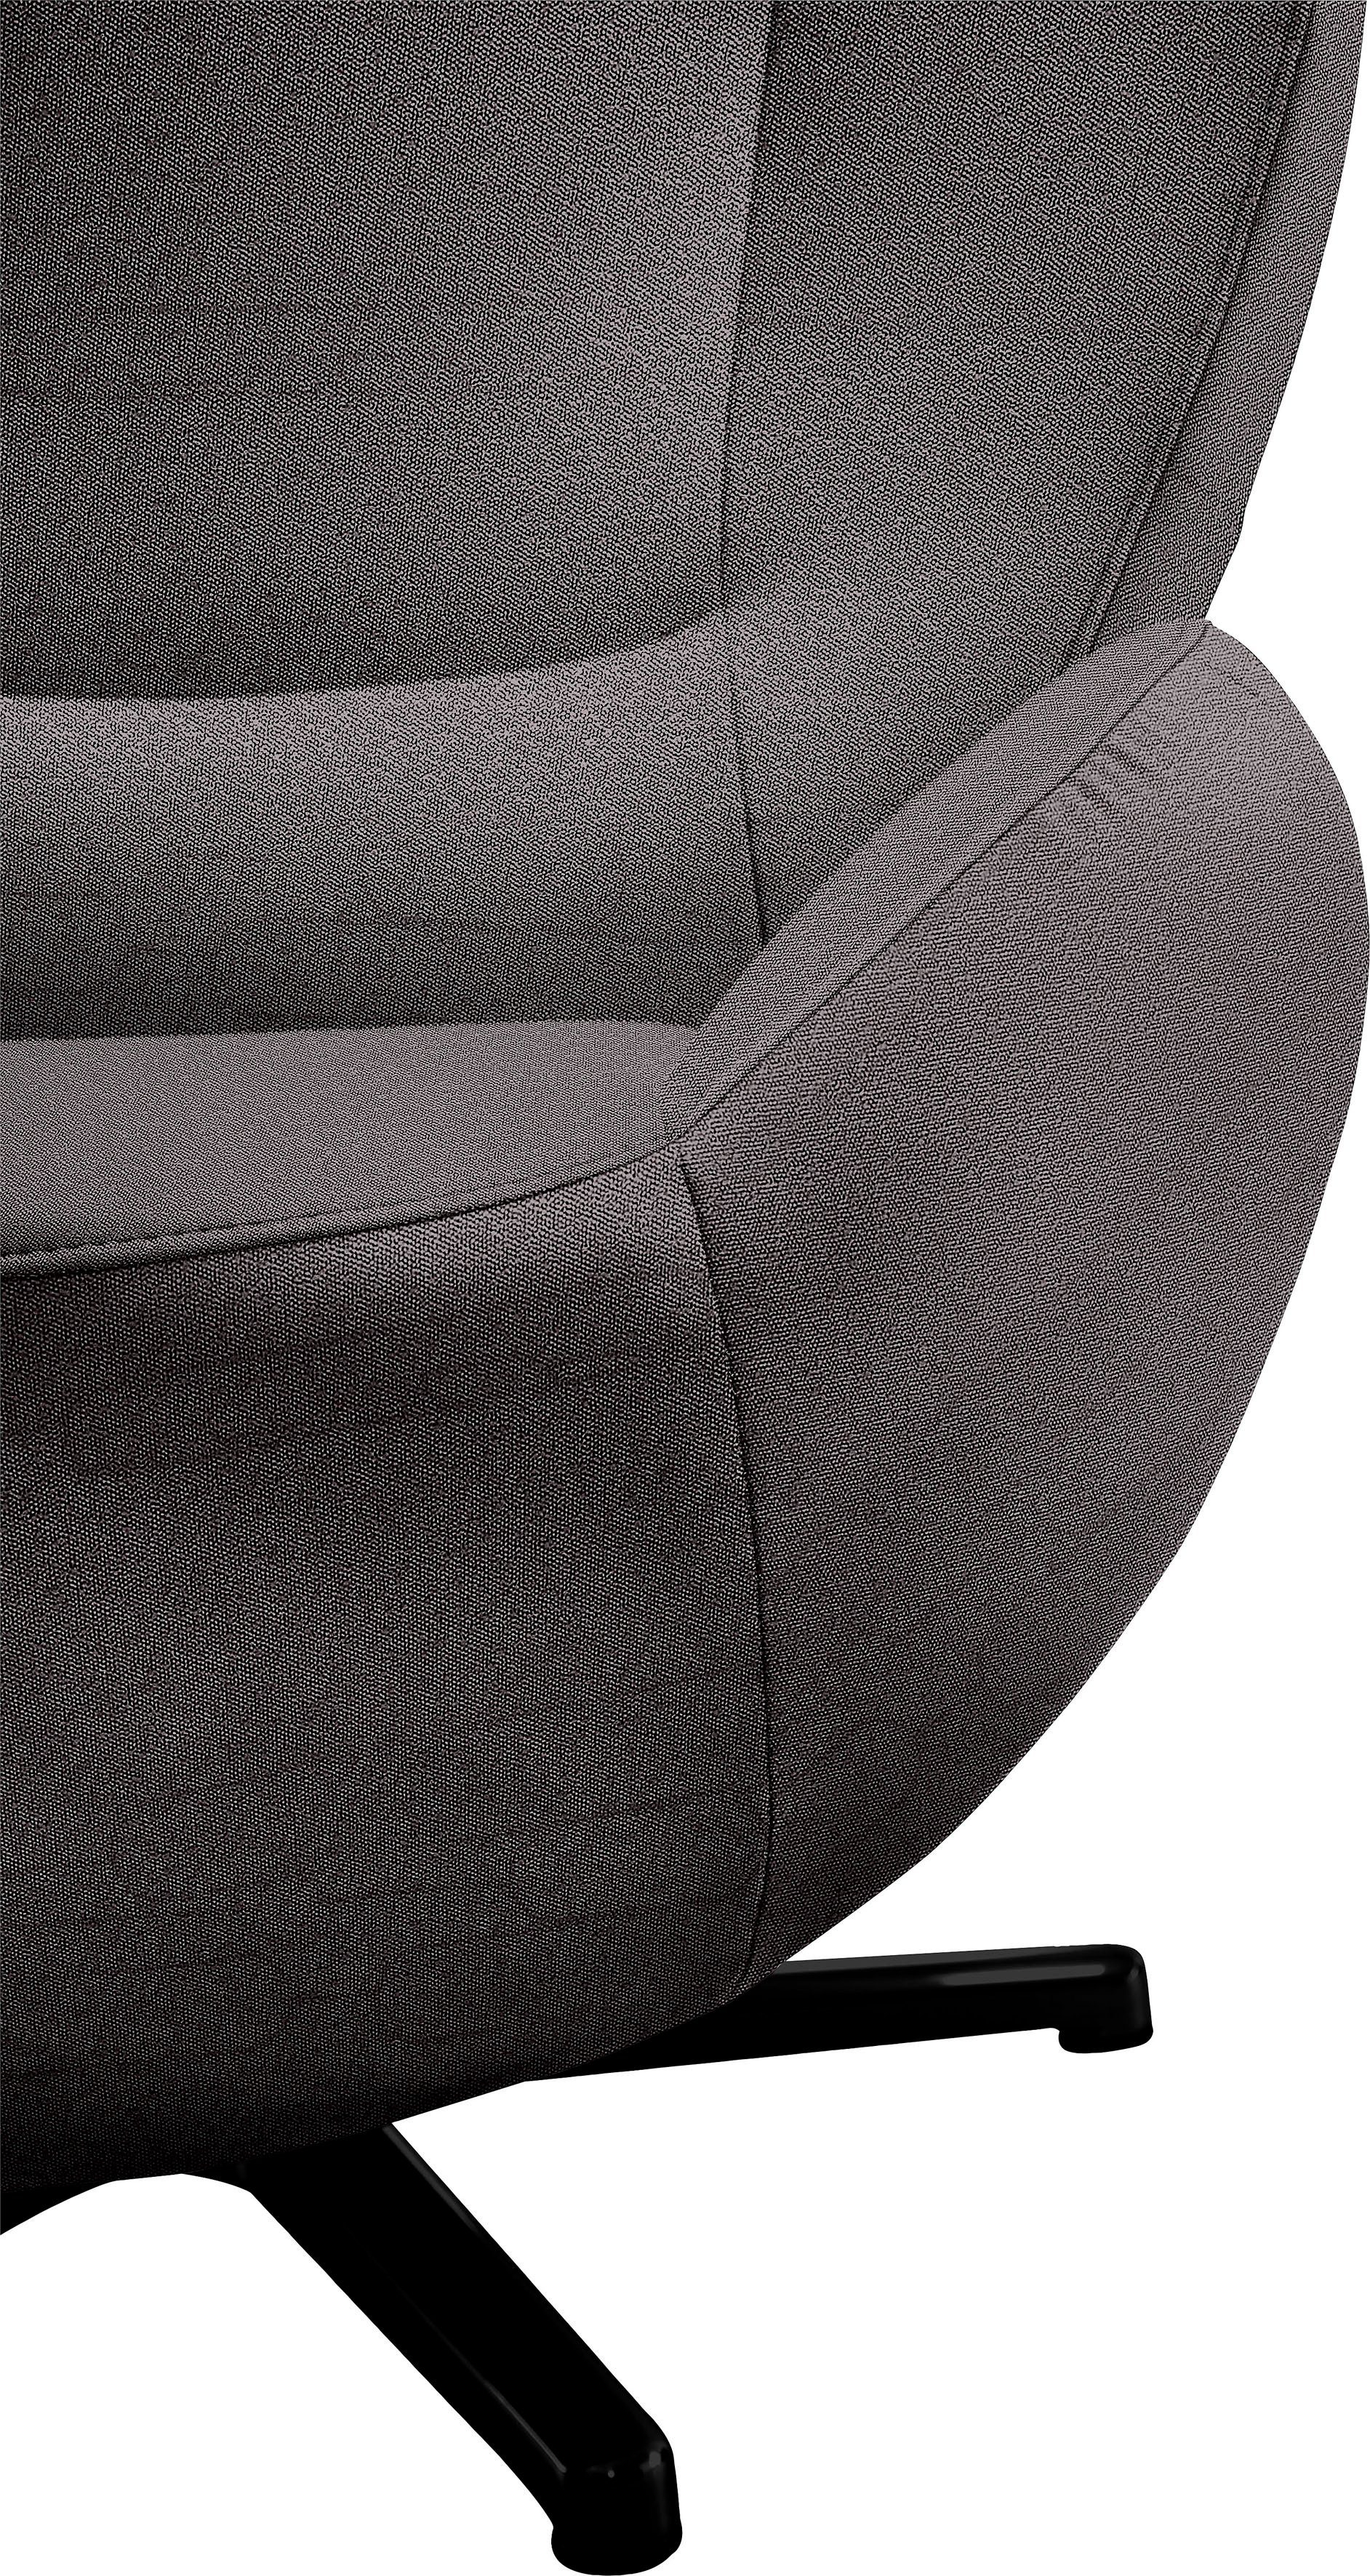 TOM TAILOR HOME Loungesessel TOM Metall-Drehfuß PURE, mit in Schwarz